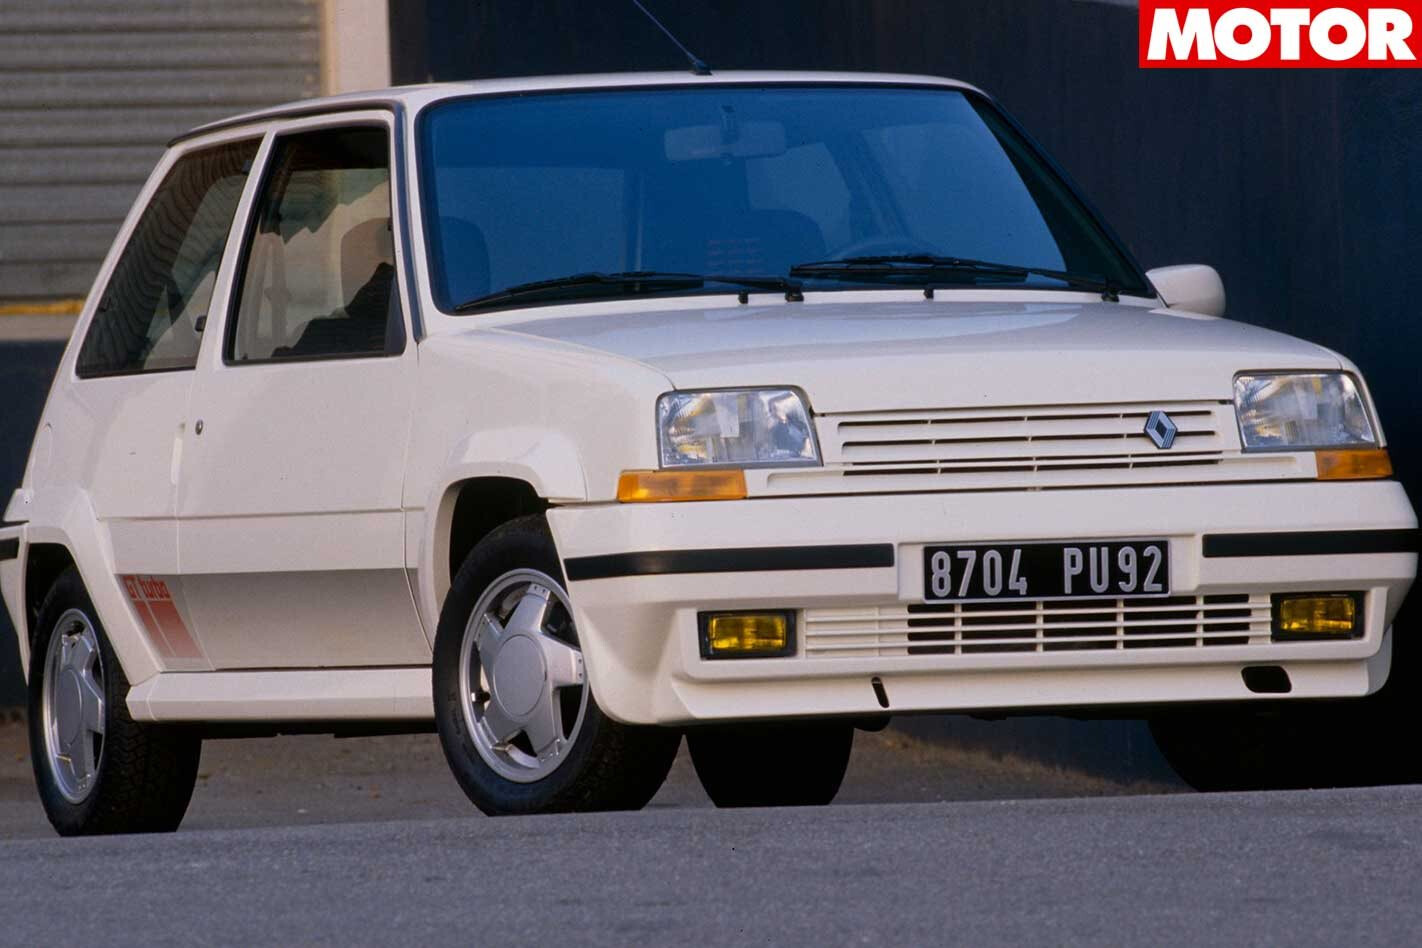 1985 1991 Renault 5 Gt Turbo Fast Car History Lesson